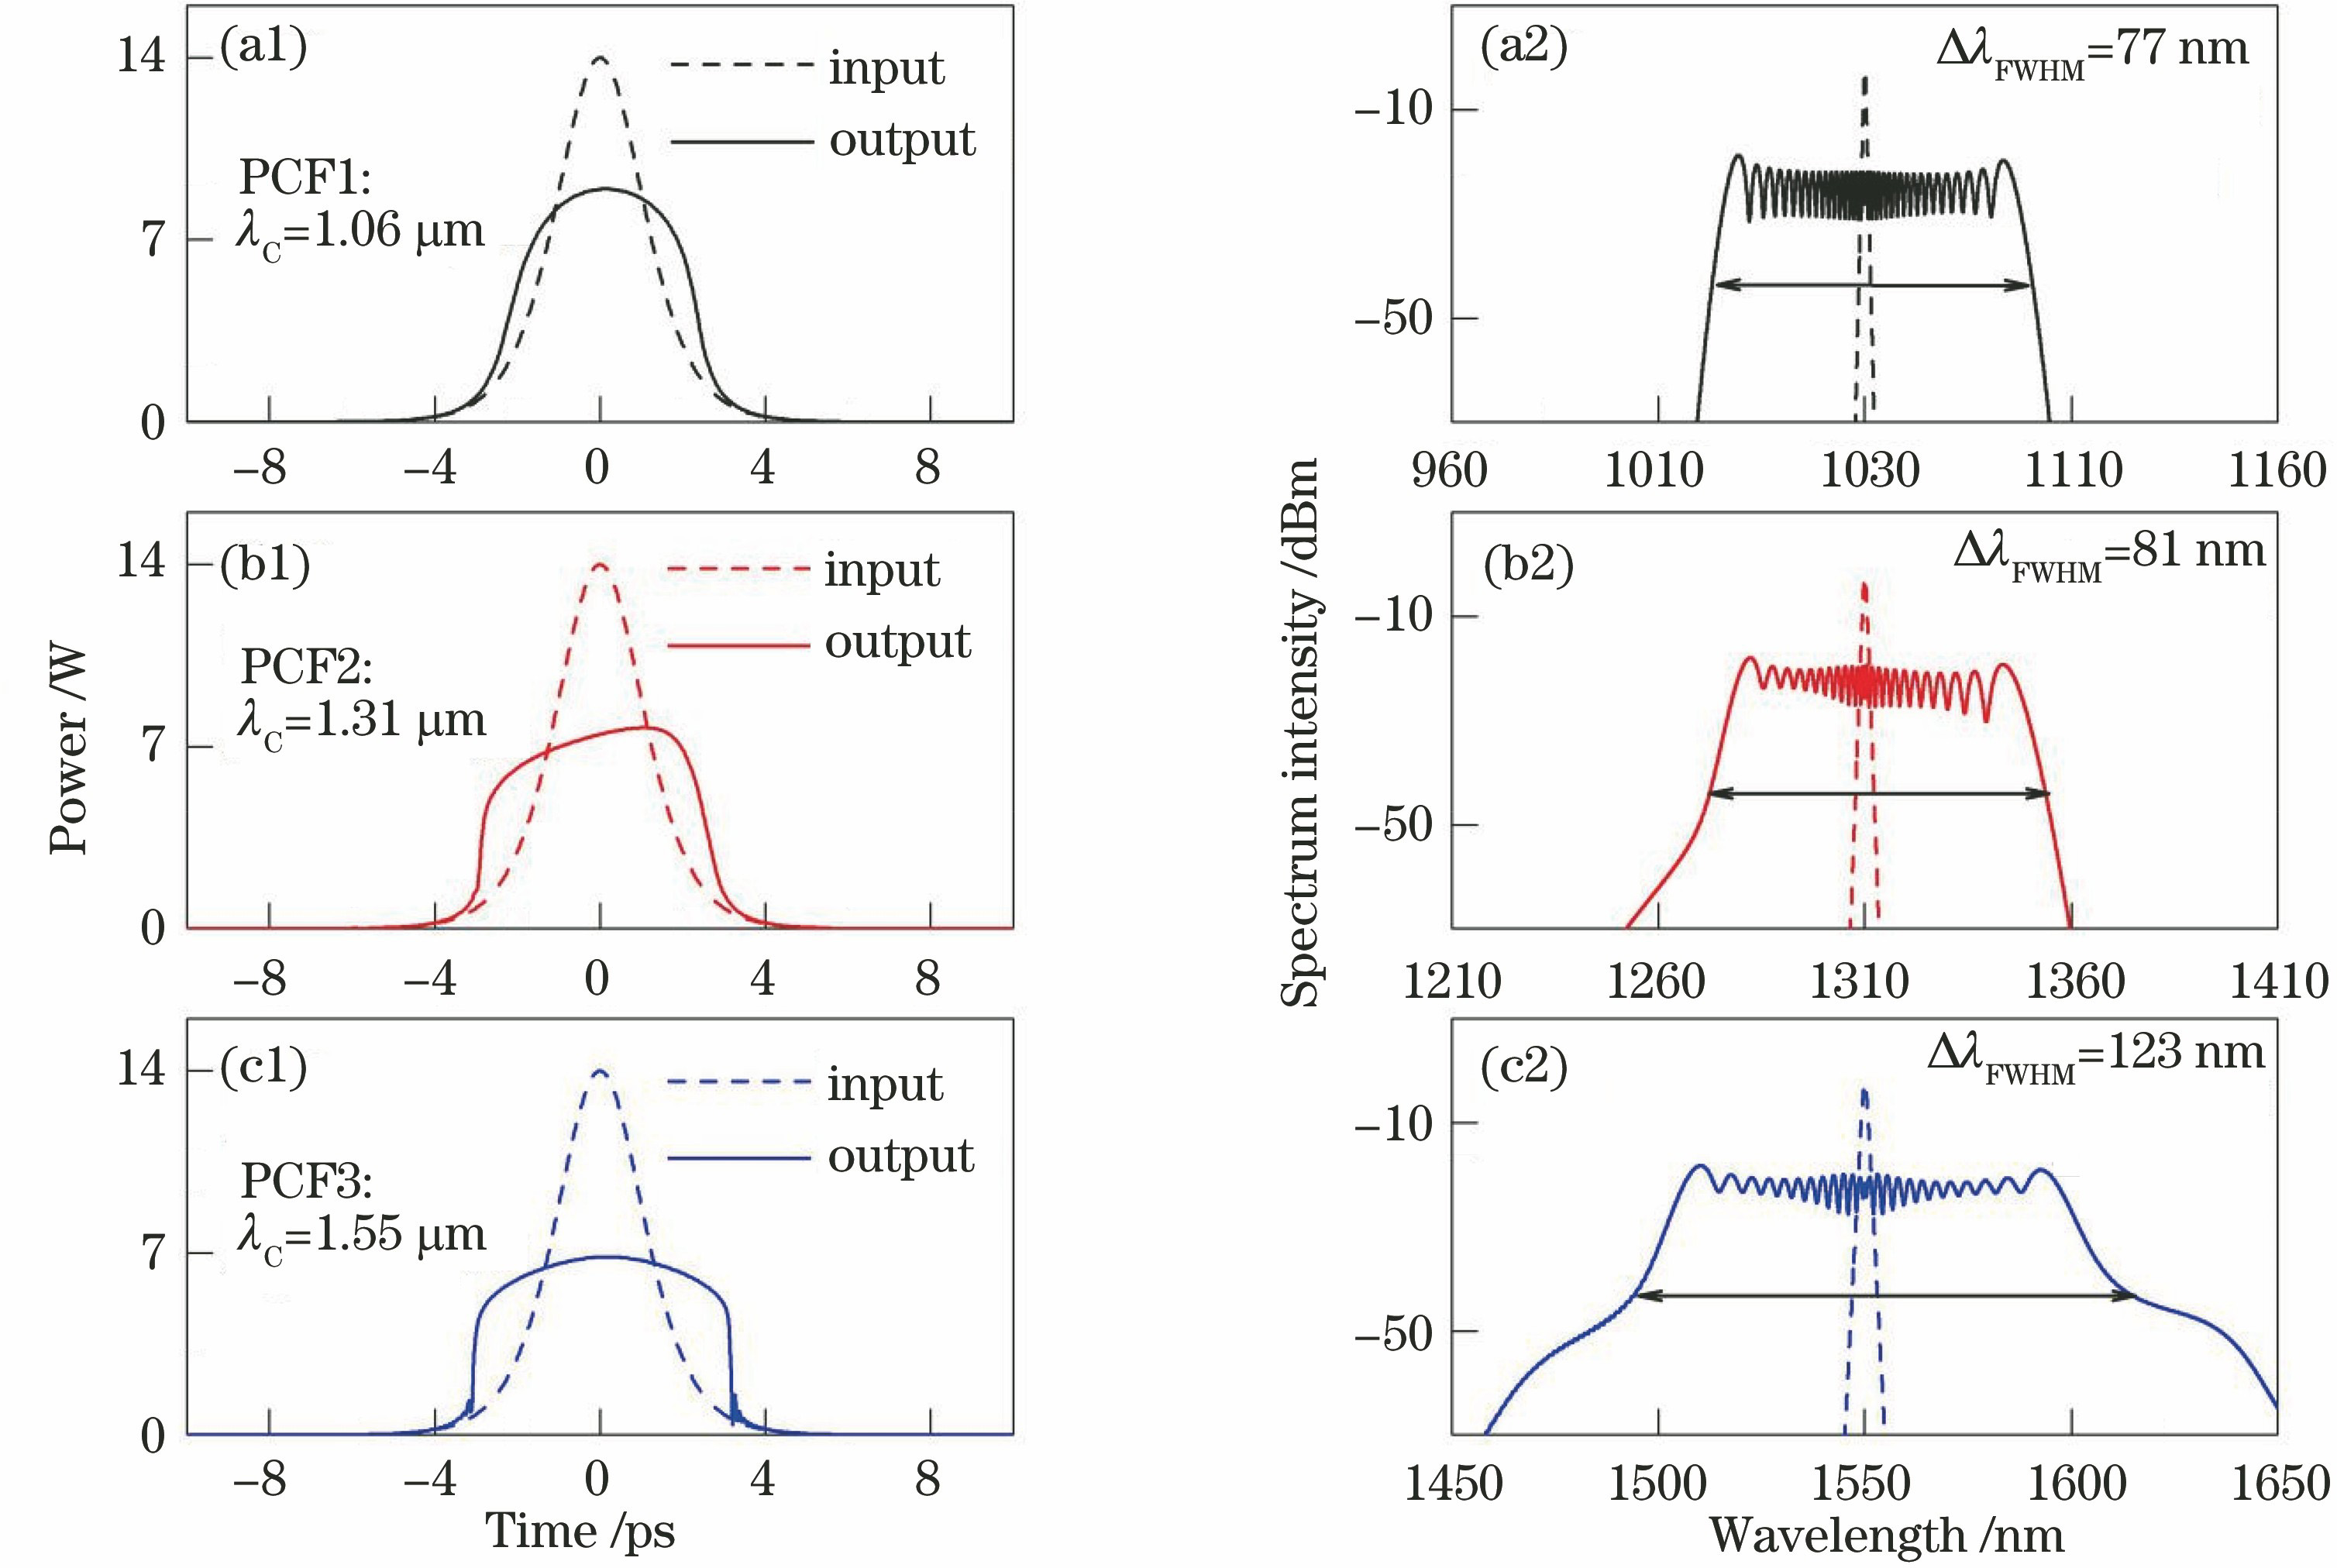 Temporal and spectral distributions of the input and output recorded after 120 m of propagation for pump pulses with different central wavelengths in different fibers: PCF1, PCF2, PCF3. (a) λC=1.06 μm; (b) λC=1.31 μm; (c) λC=1.55 μm